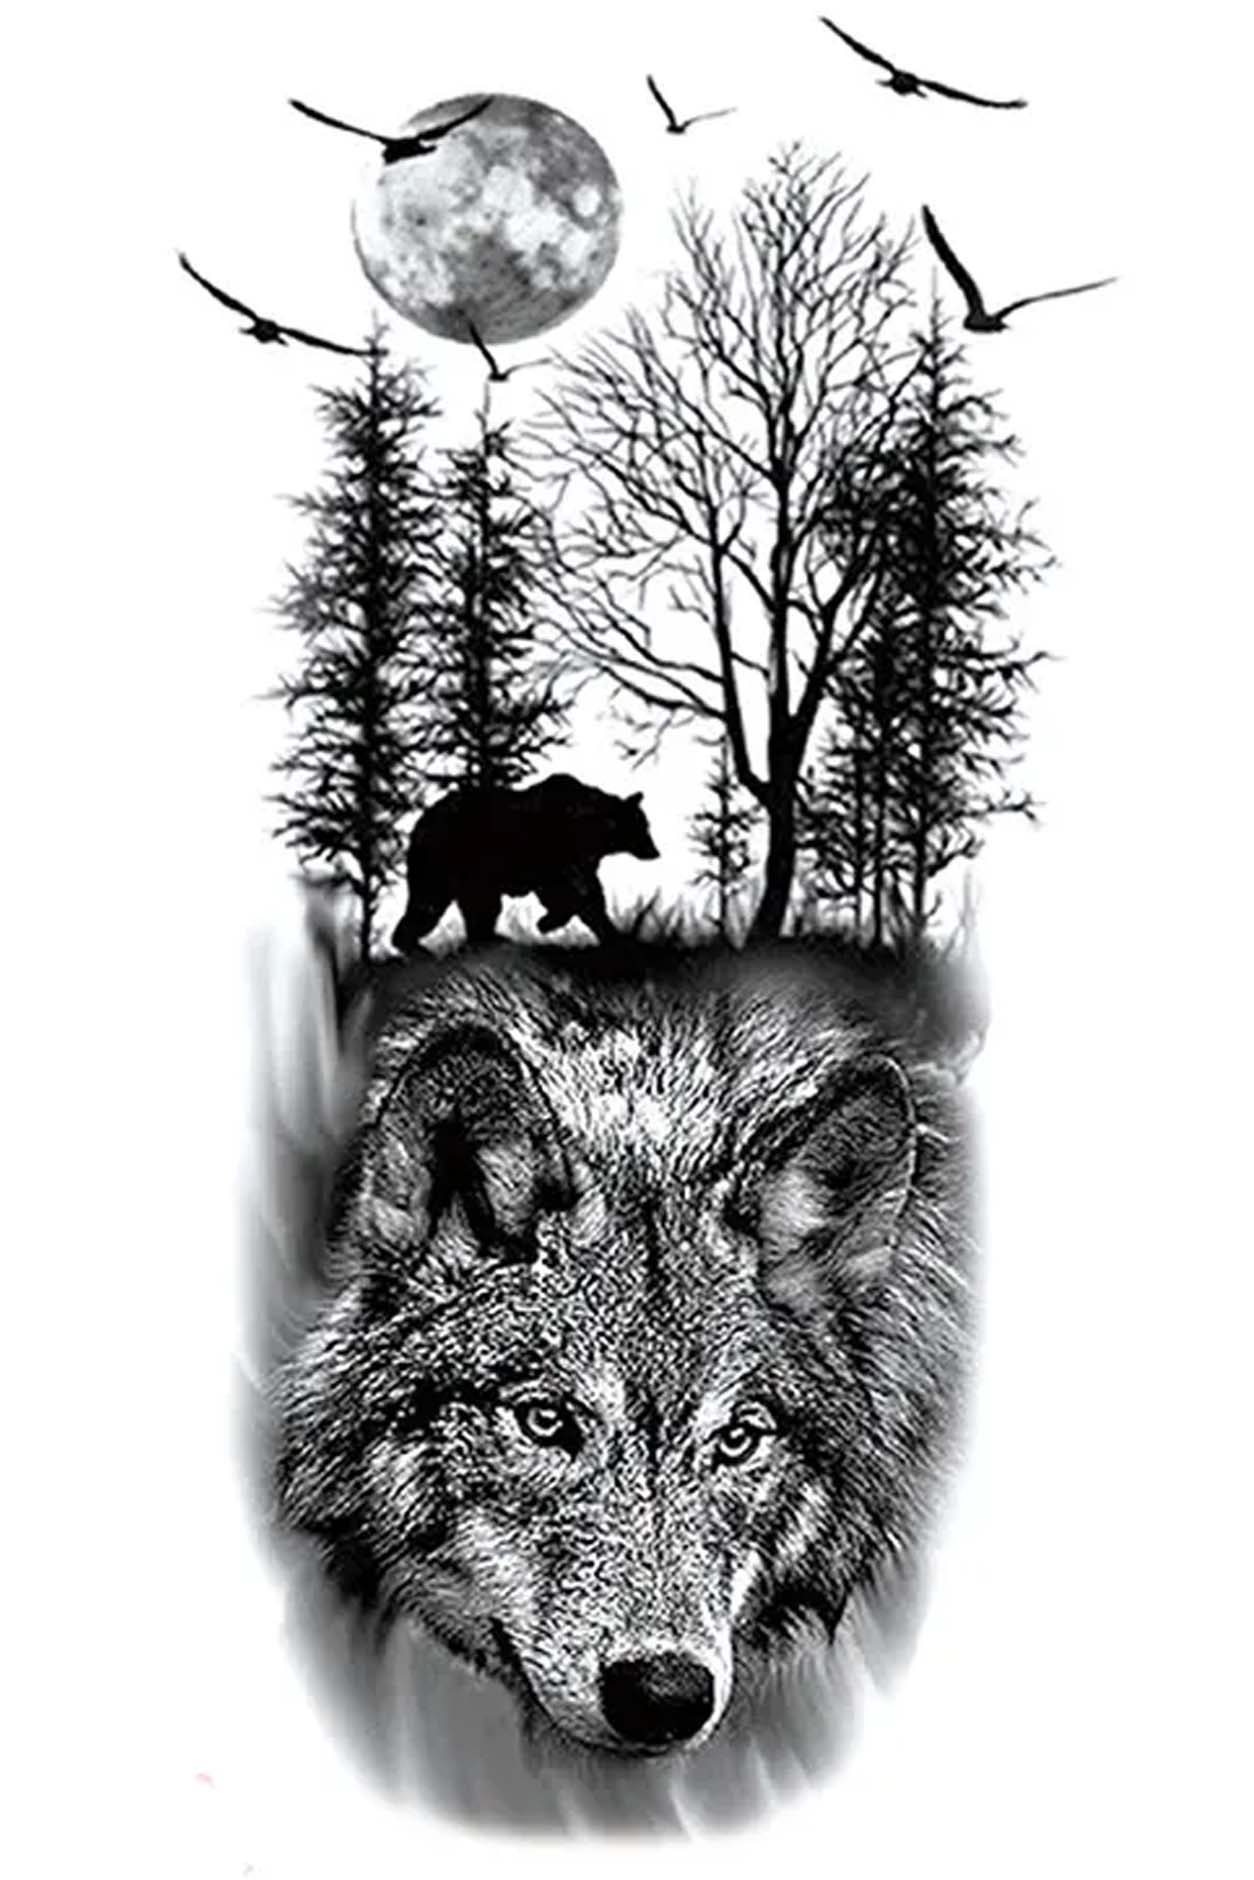 The wolf, the bear, under a full moon in the woods. What mystical troubles will this image bring? Crows have been startled, flying over the top of the bear and the wolf, creating a story of distress and trouble. The image of the wolf is so lifelike that it looks directly into you.